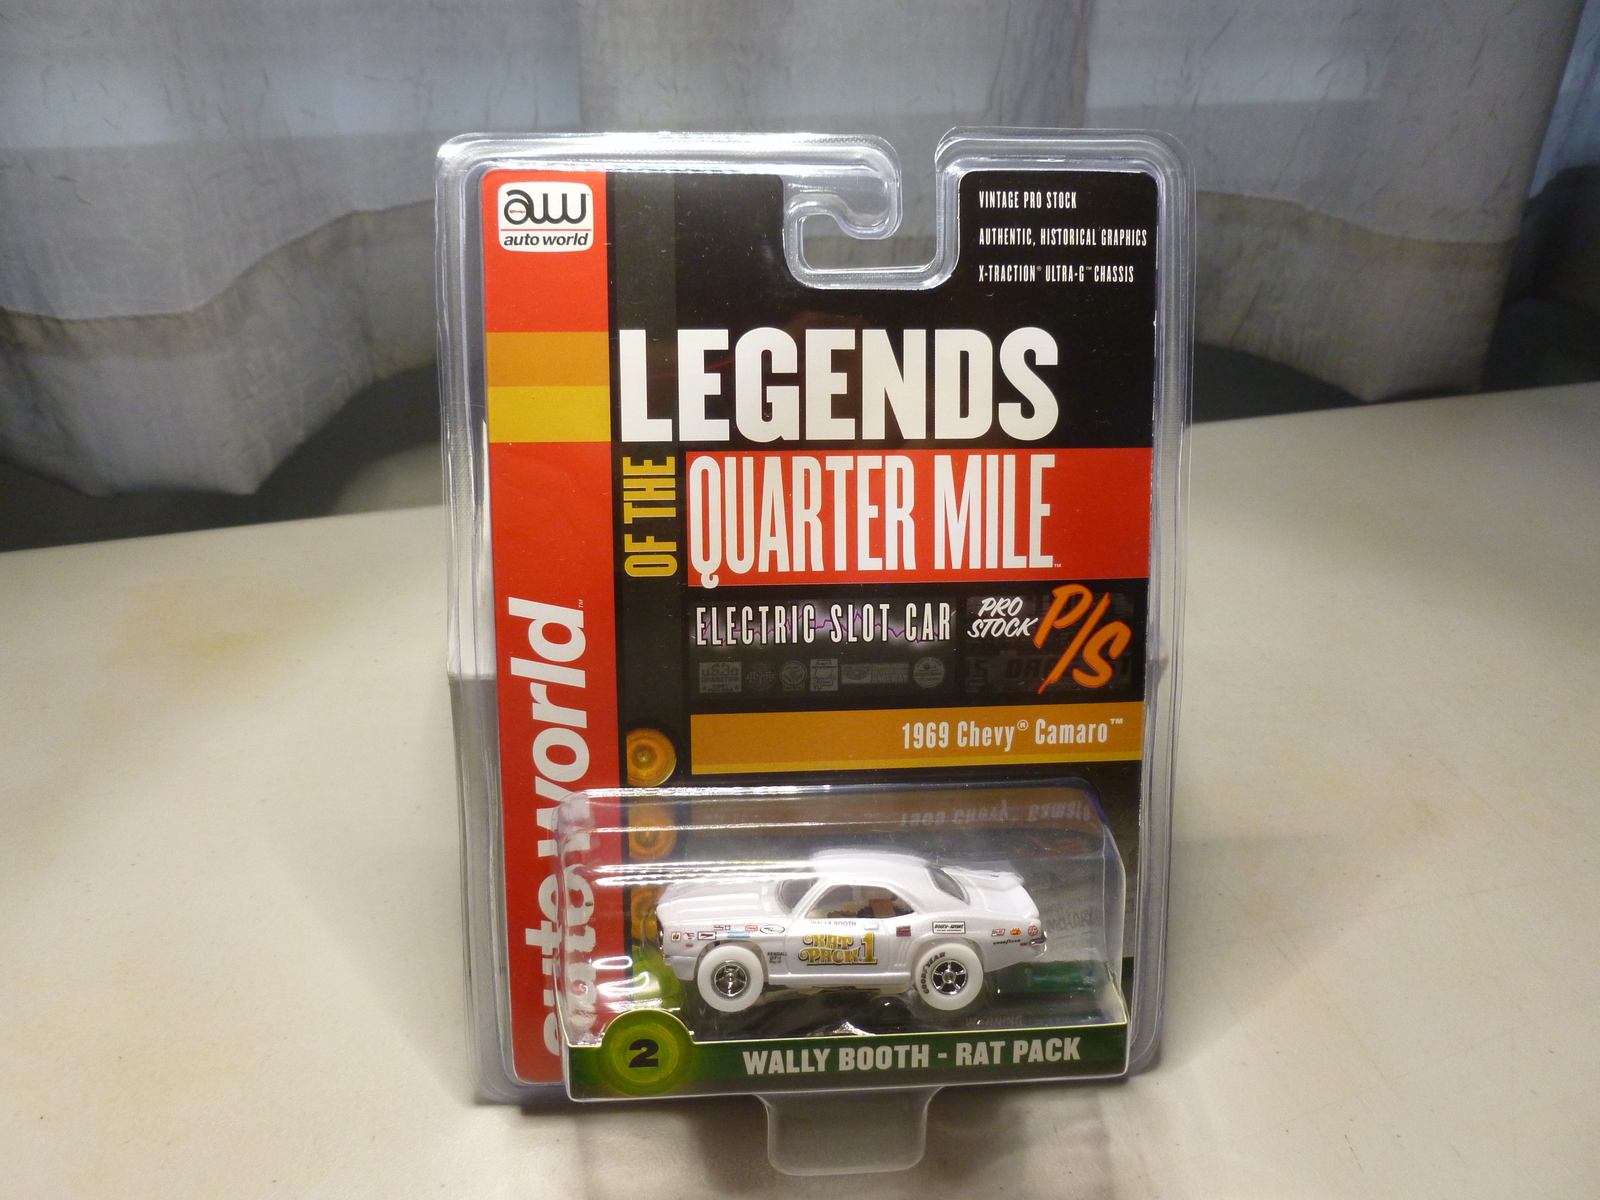 NEW AW LEGENDS OF THE QUARTER MILE P/S1969 #2 WALLY BOOTH-RAT PACK IWHEELS CAR - $69.99